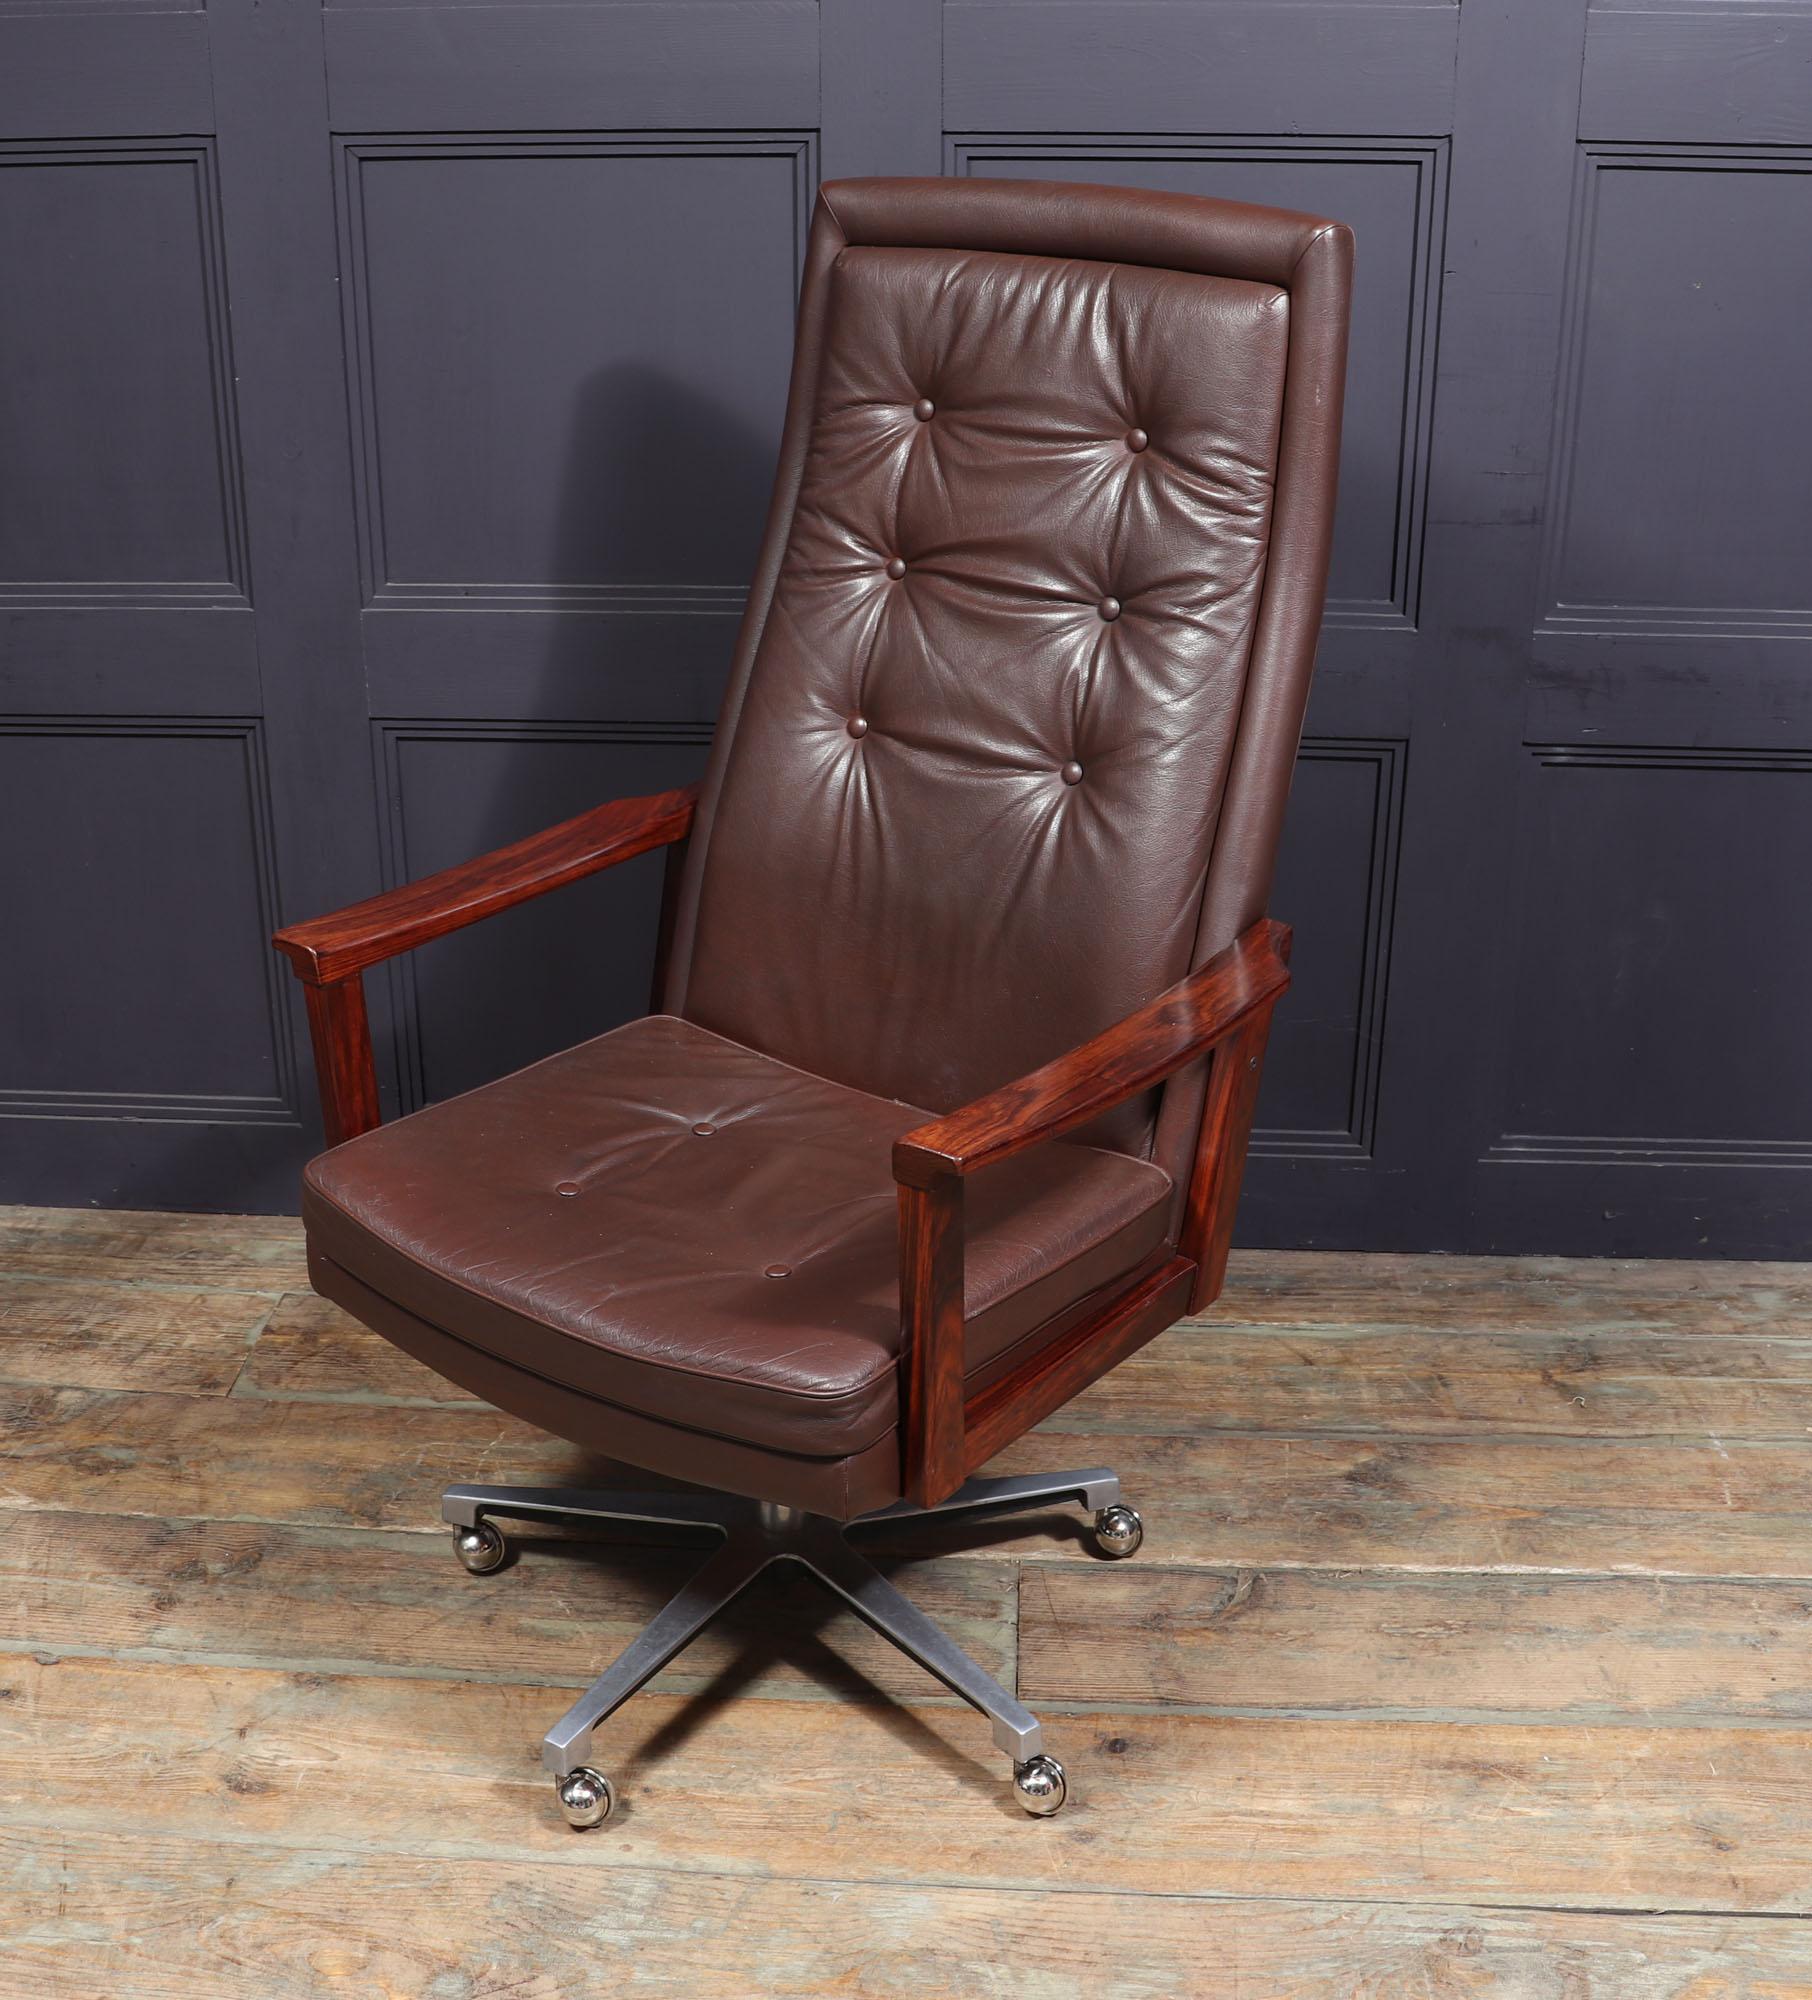 A Danish rosewood and buttoned leather upholstery executive desk chair, with tilt swivel and adjustable height seat this is the king of comfort at any desk. The thick leather upholstery is in excellent condition with no repairs and minimal wear, the